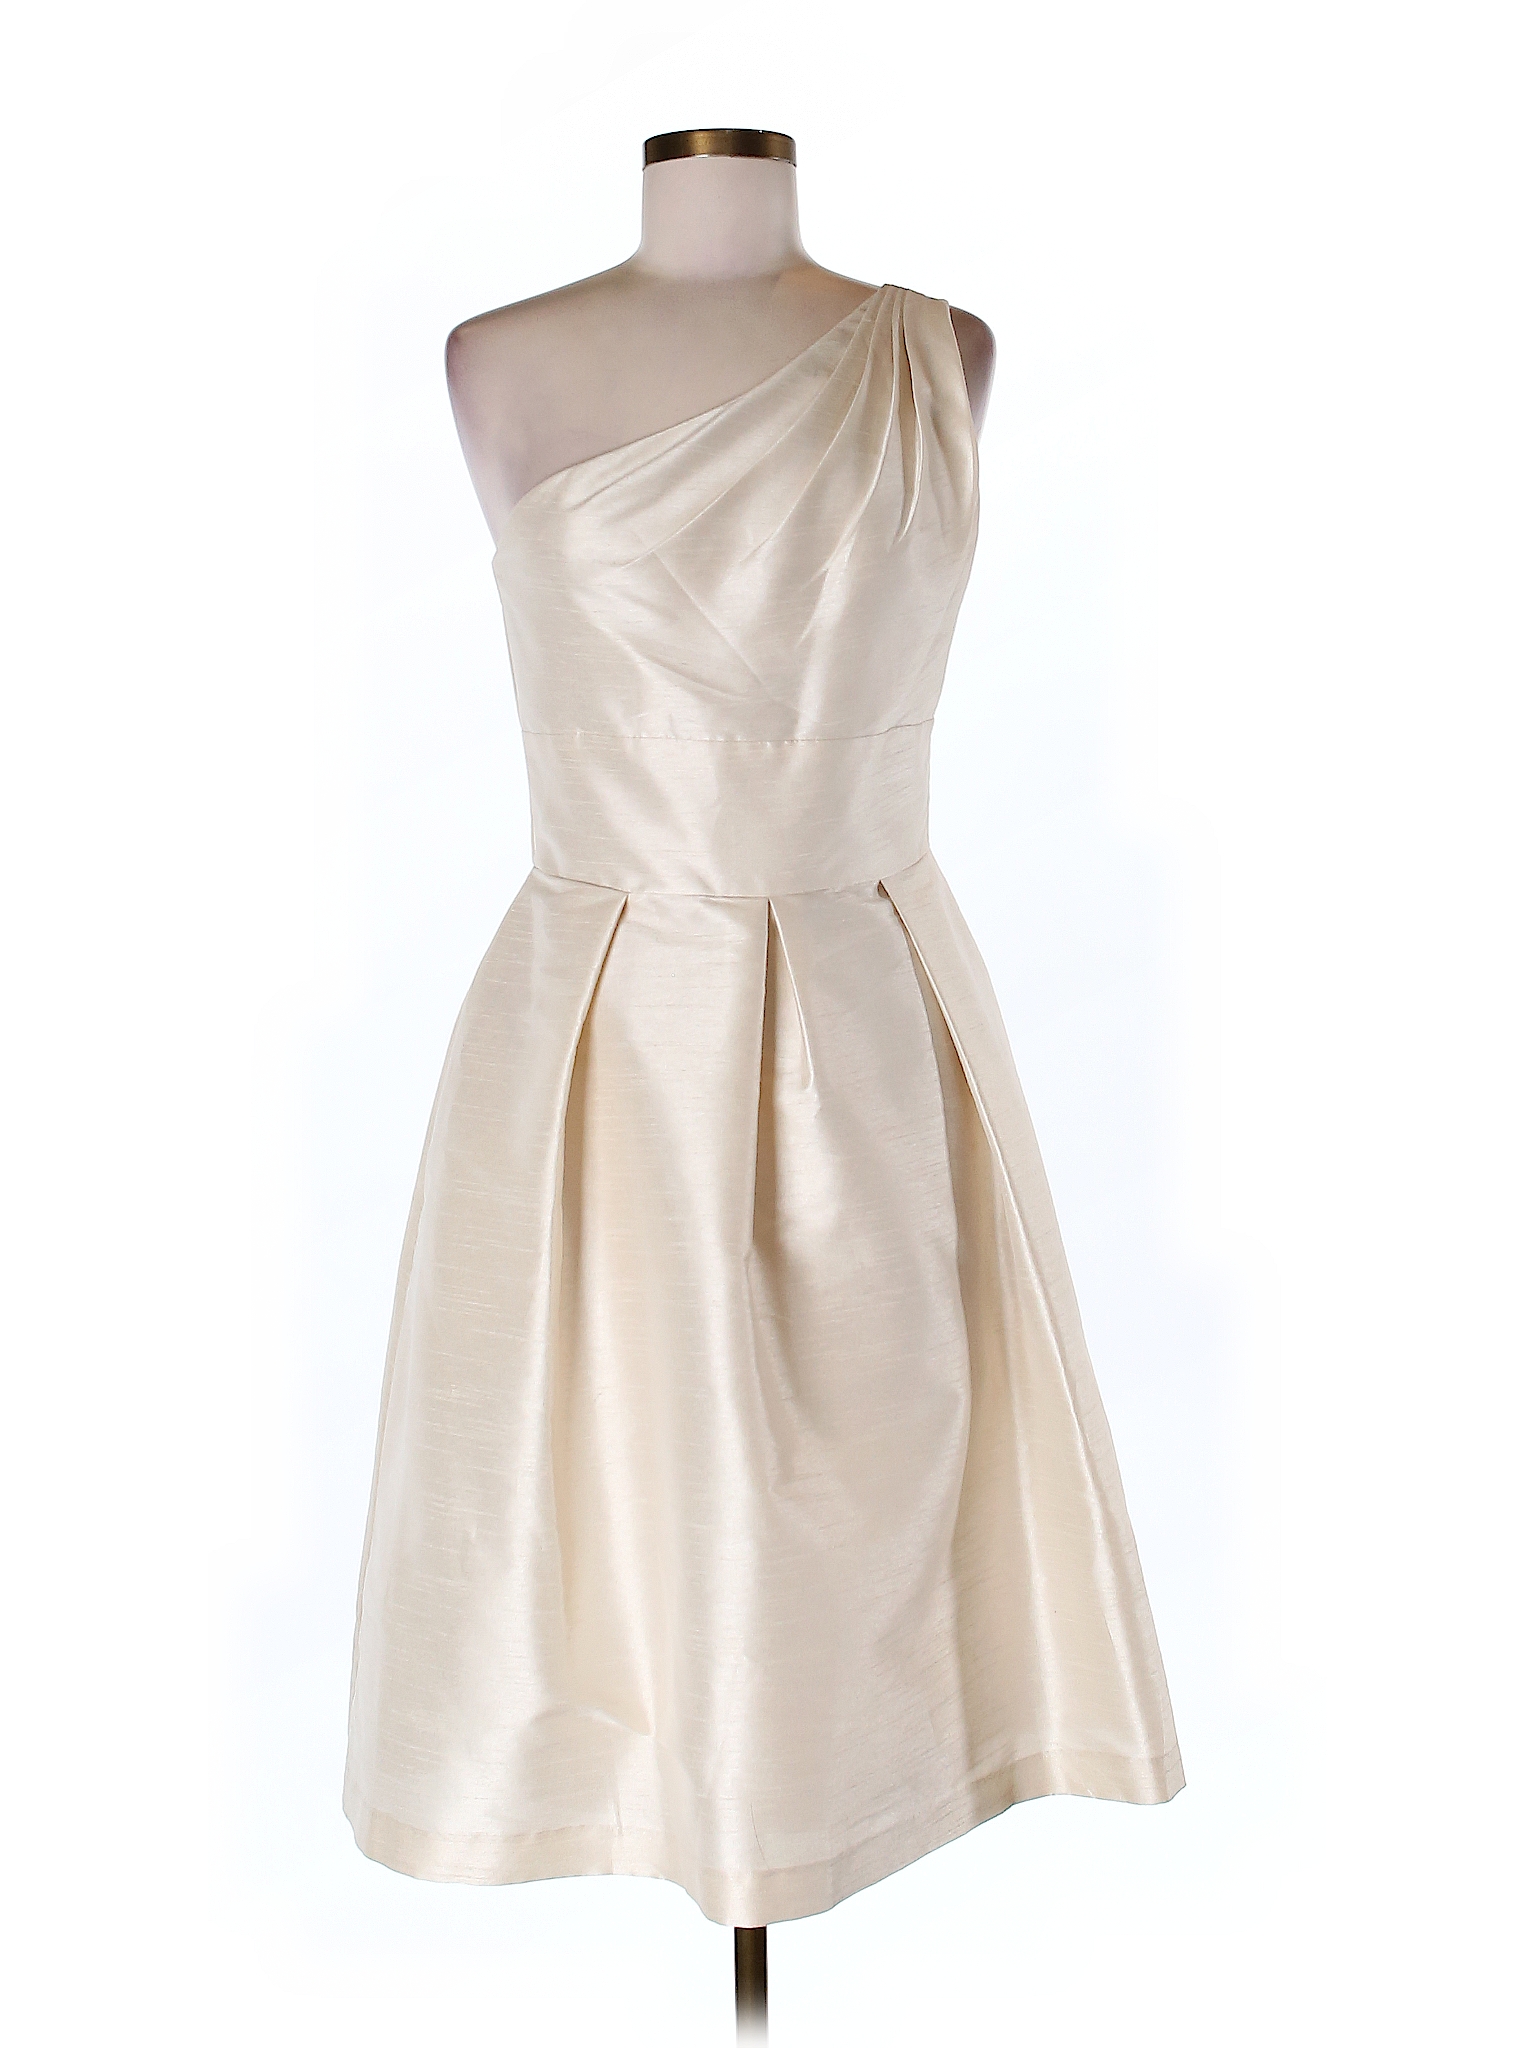 Alfred Sung 100% Polyester Solid Beige Cocktail Dress Size 6 - 74% off ...